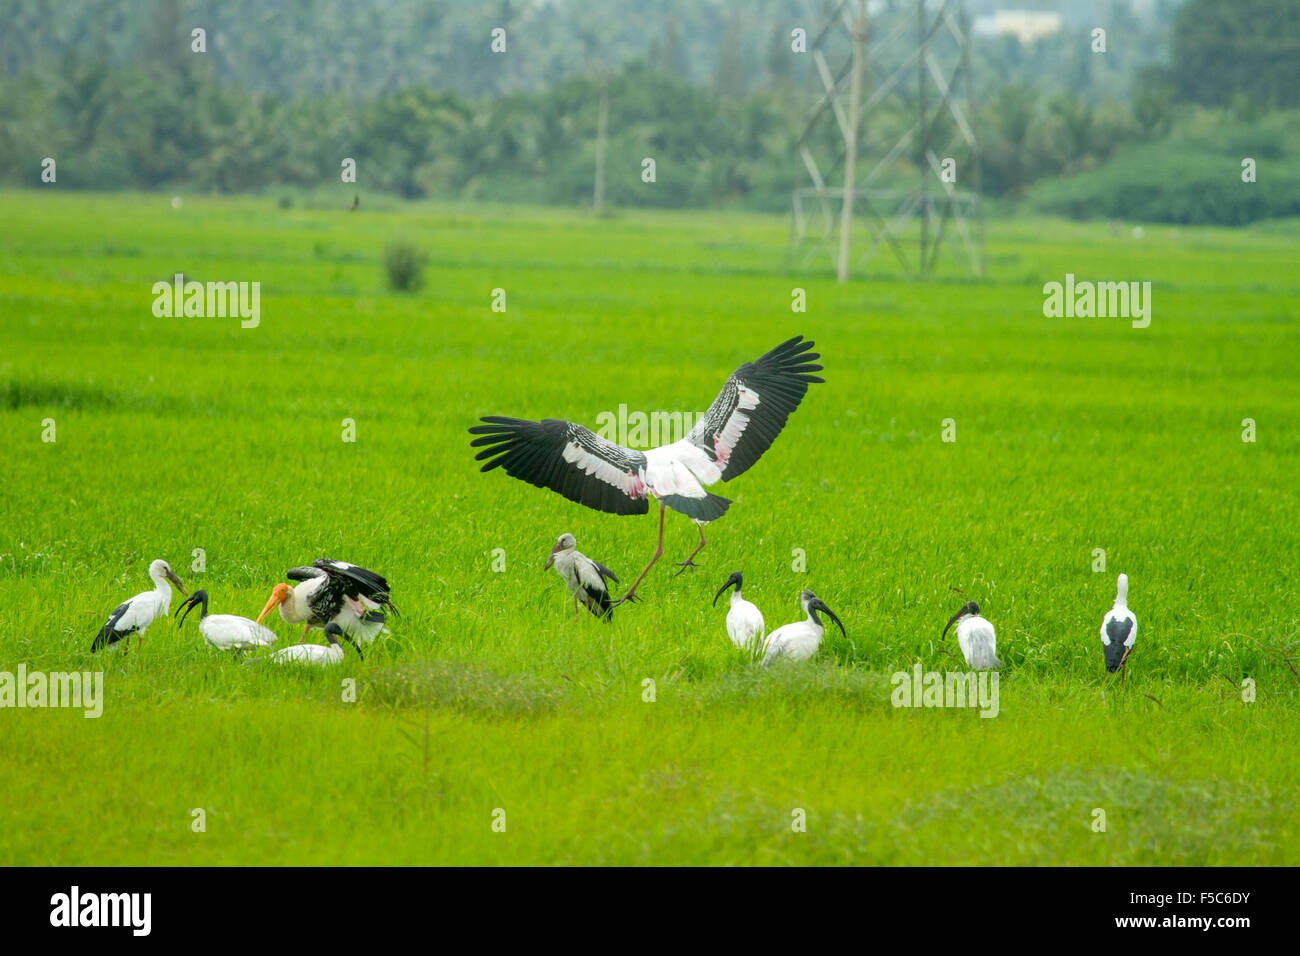 A group of painted storks and ibis in a green paddy field Stock Photo